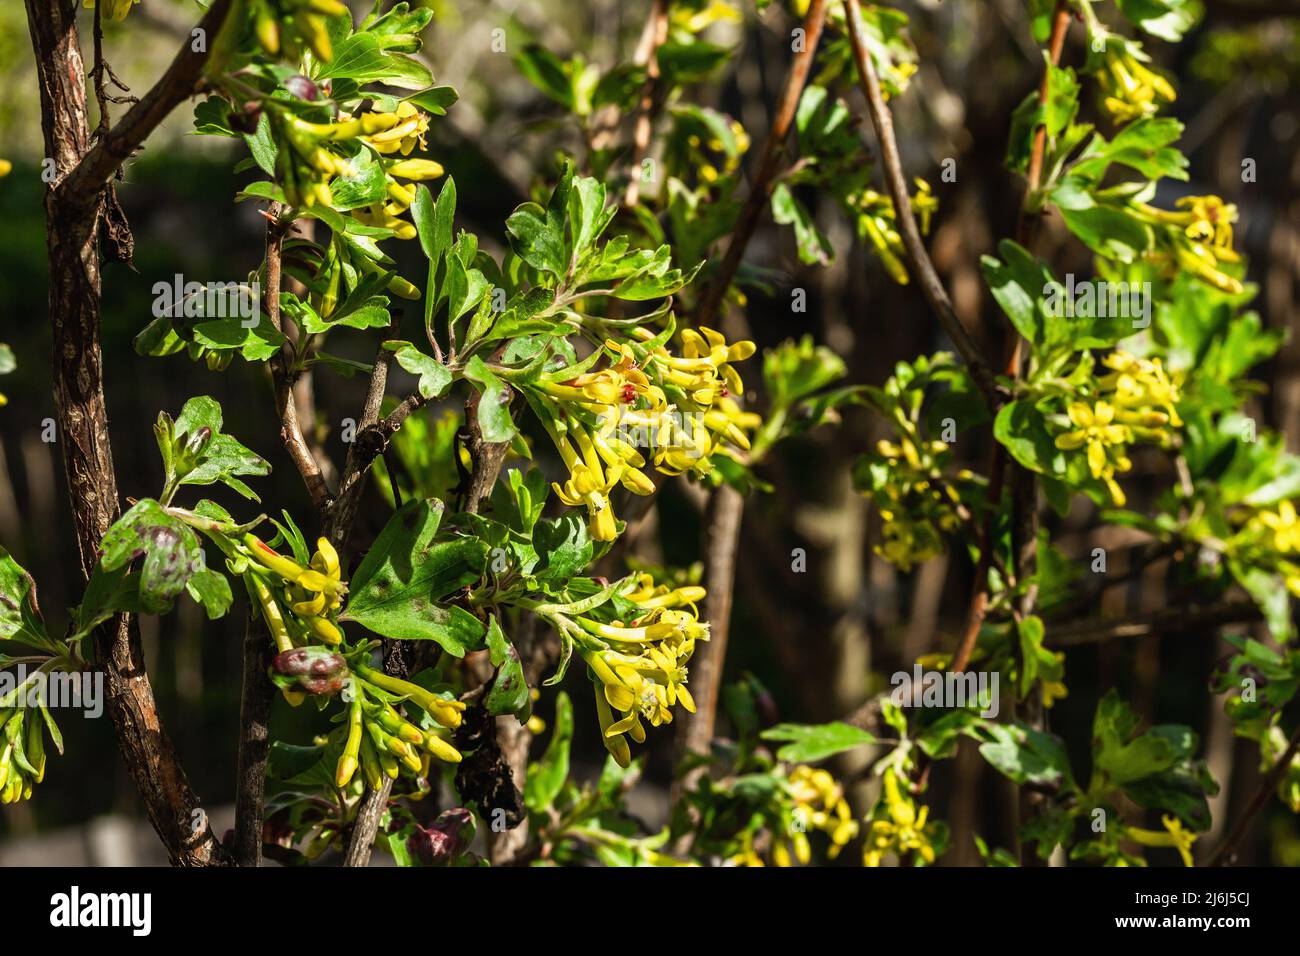 Blooming golden currant or Ribes aureum bush in the garden. Spring seasonal of growing plants. Gardening concept background Stock Photo